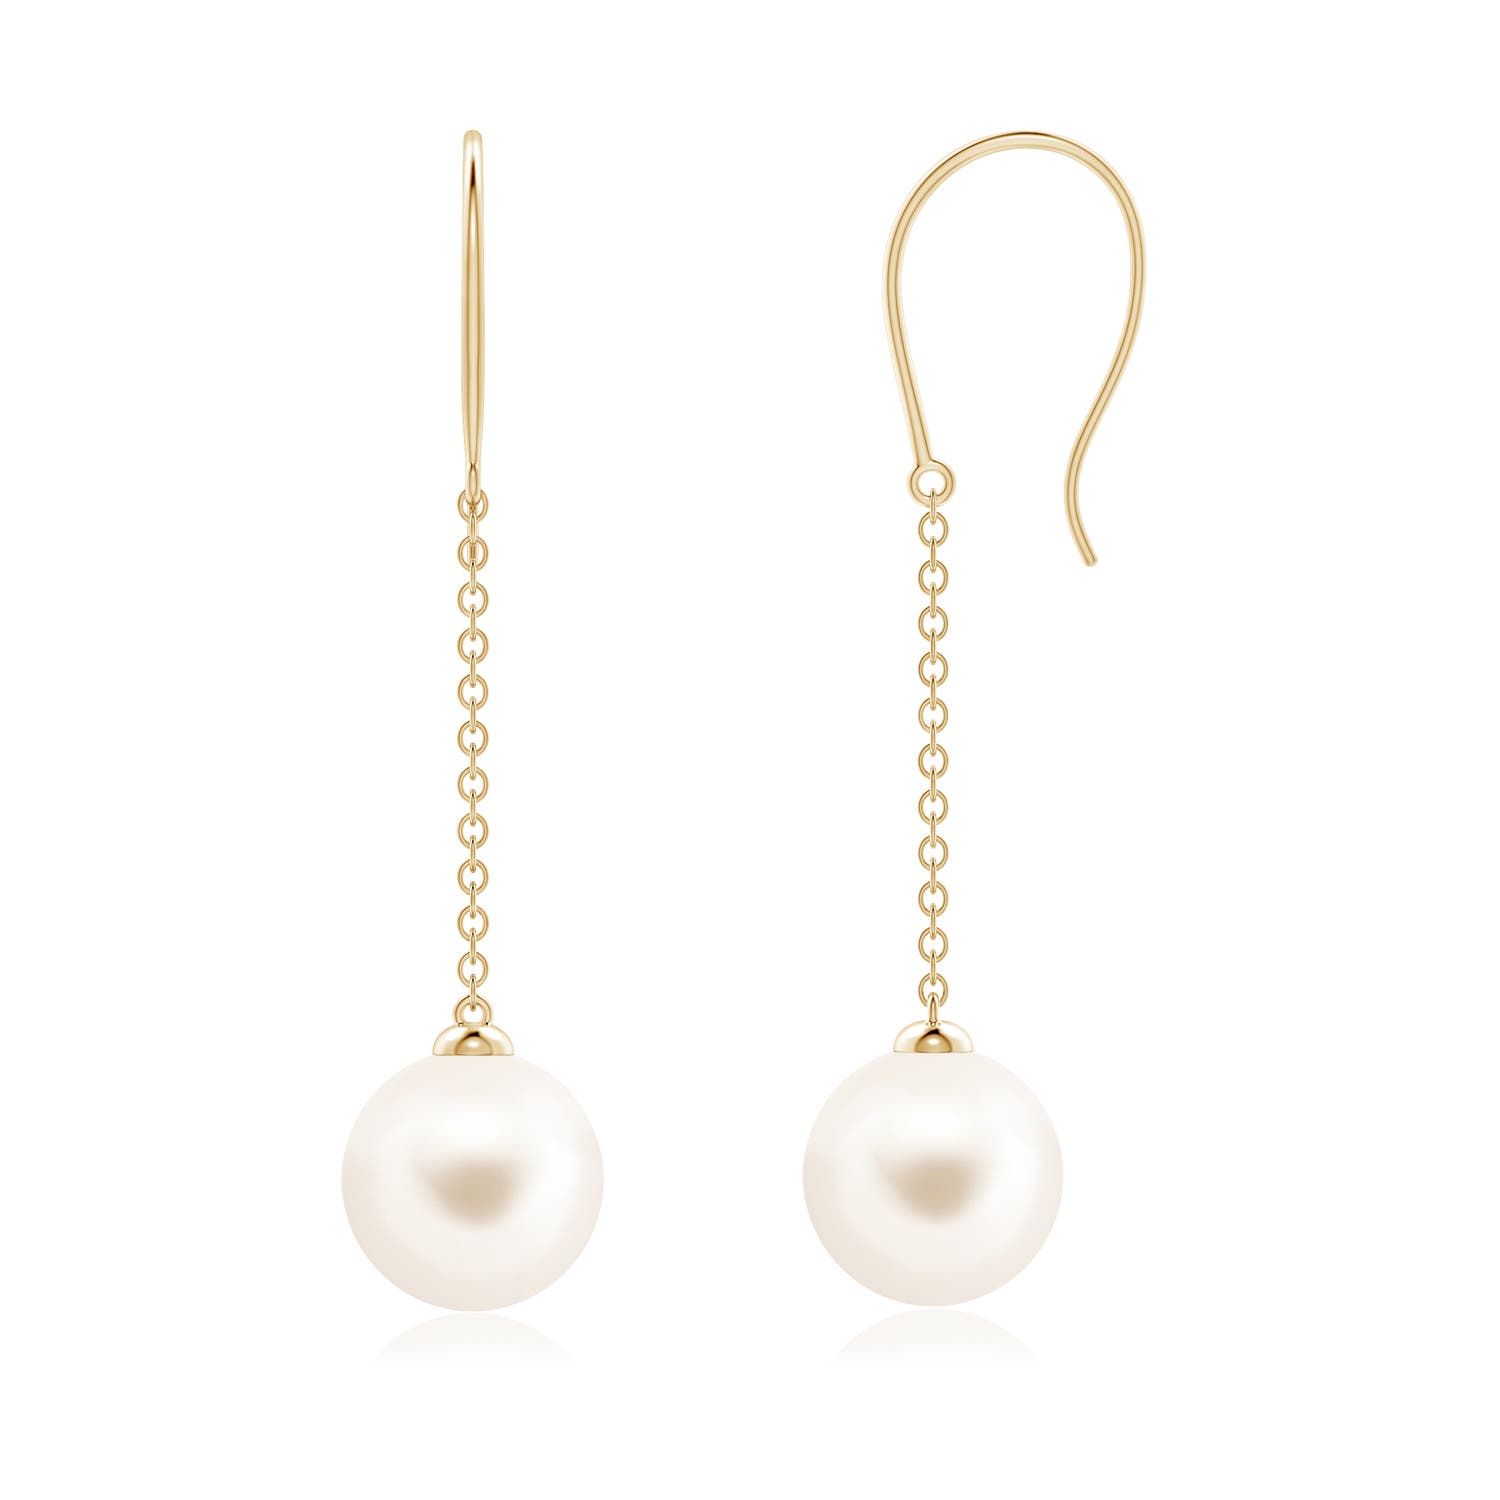 Angara Dangling Solitaire Freshwater Pearl Earrings in 14K White Gold | 8mm Cabochon Freshwater Cultured Pearl Stud Earrings